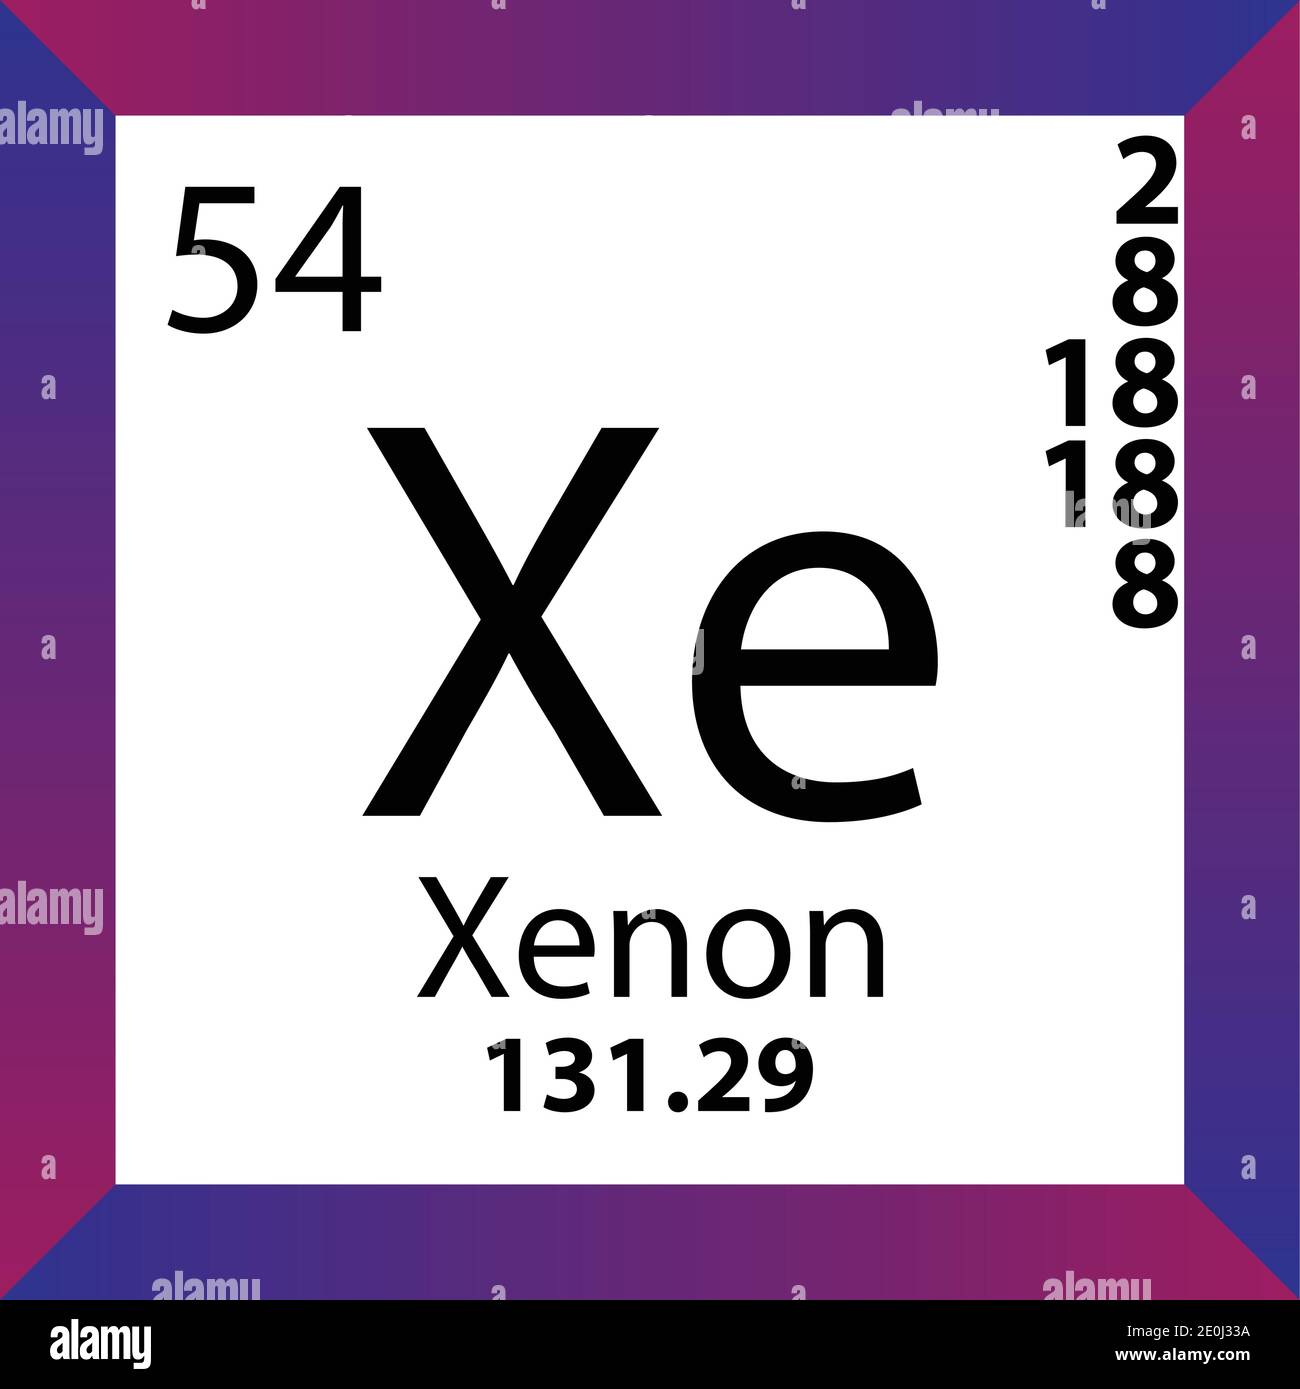 Pictures, stories, and facts about the element Xenon in the Periodic Table